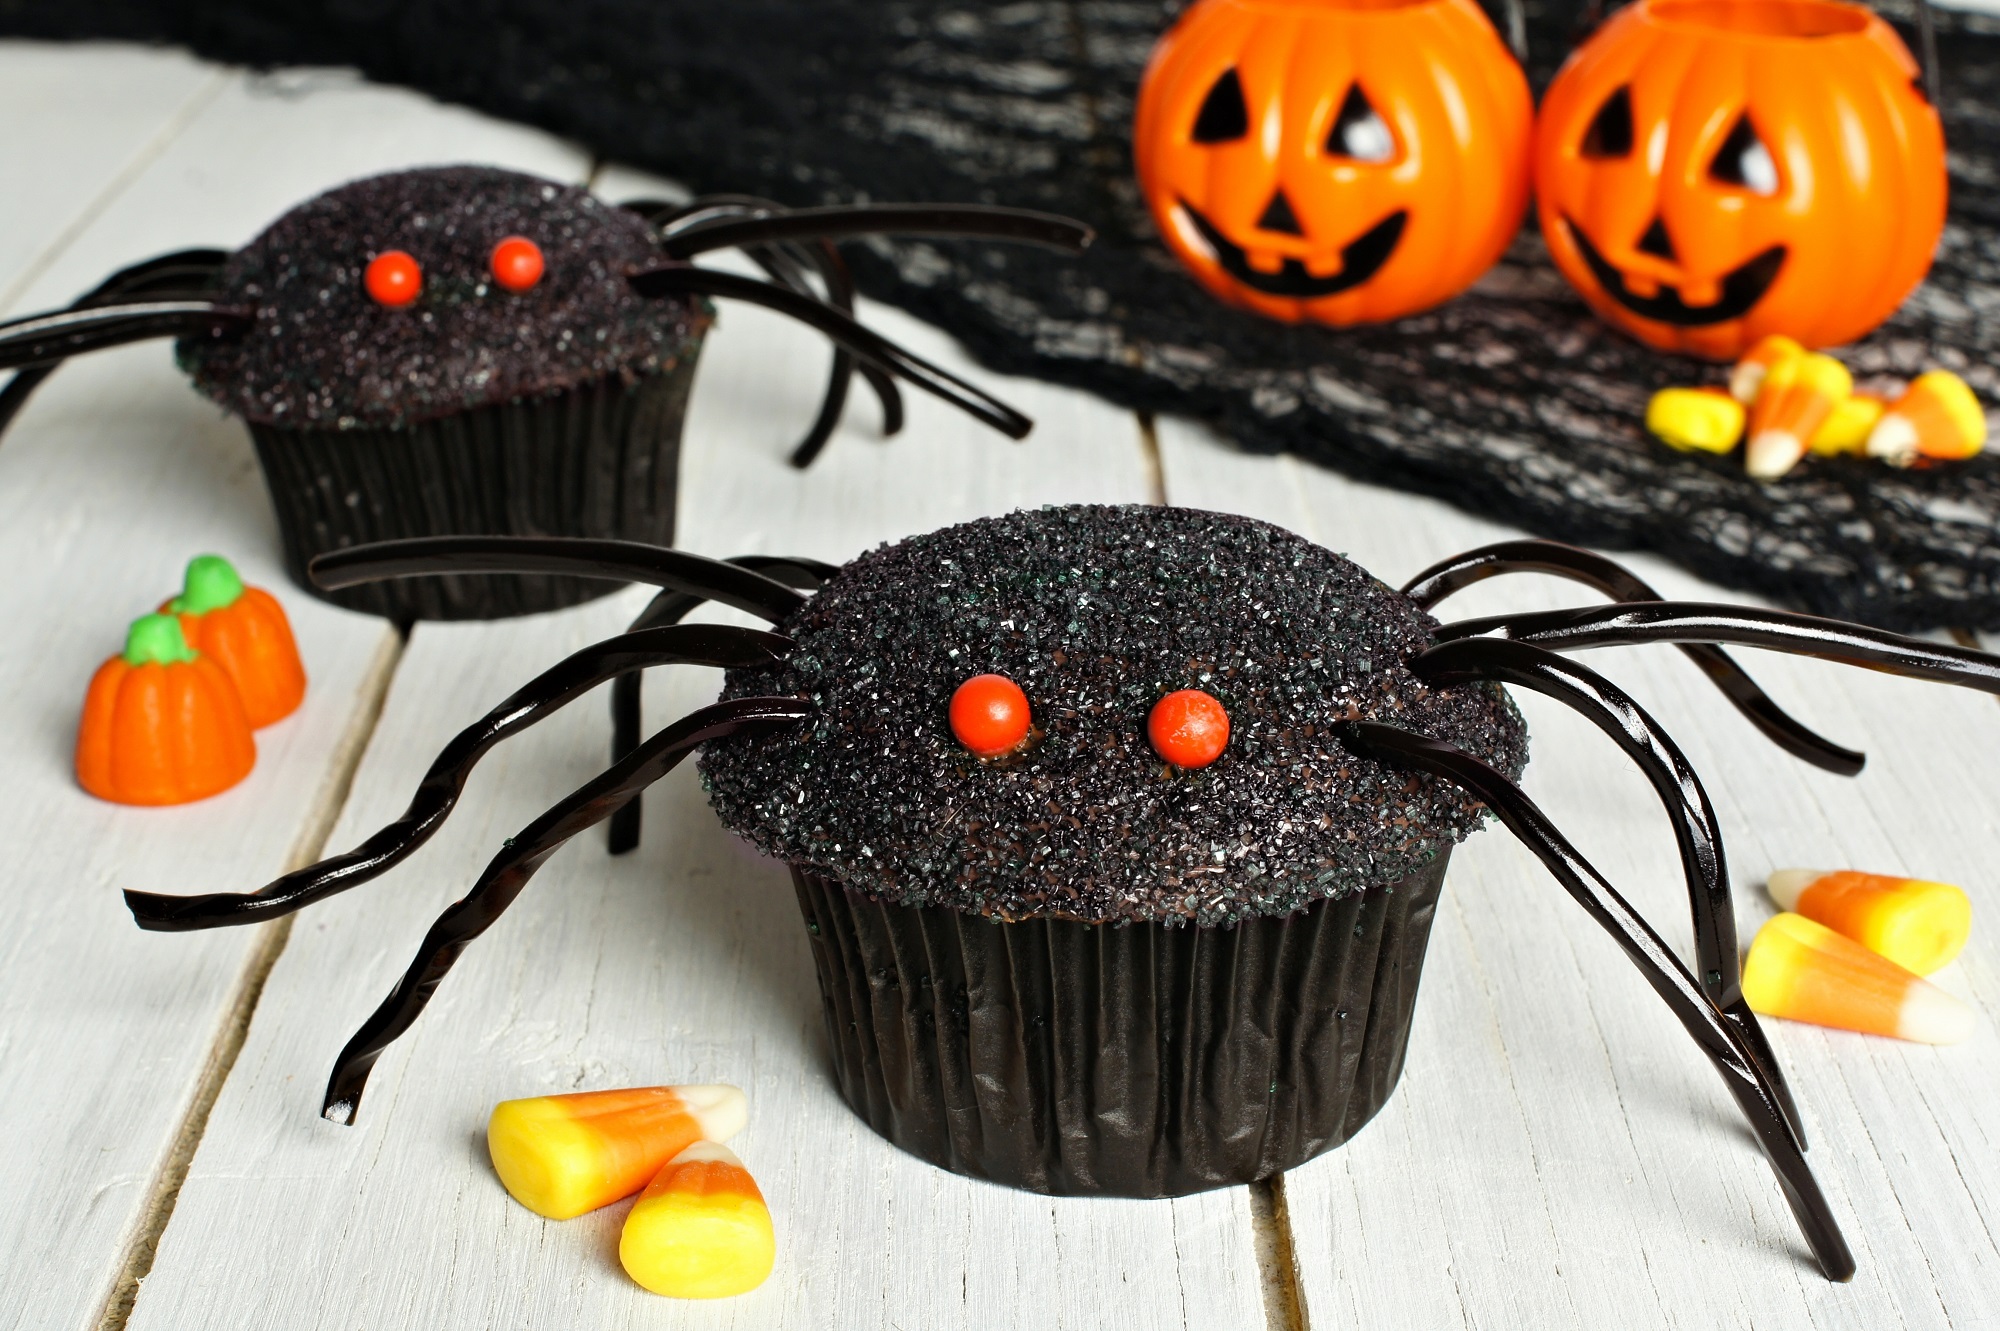 Red Eyed Spooky Spider Cupcakes